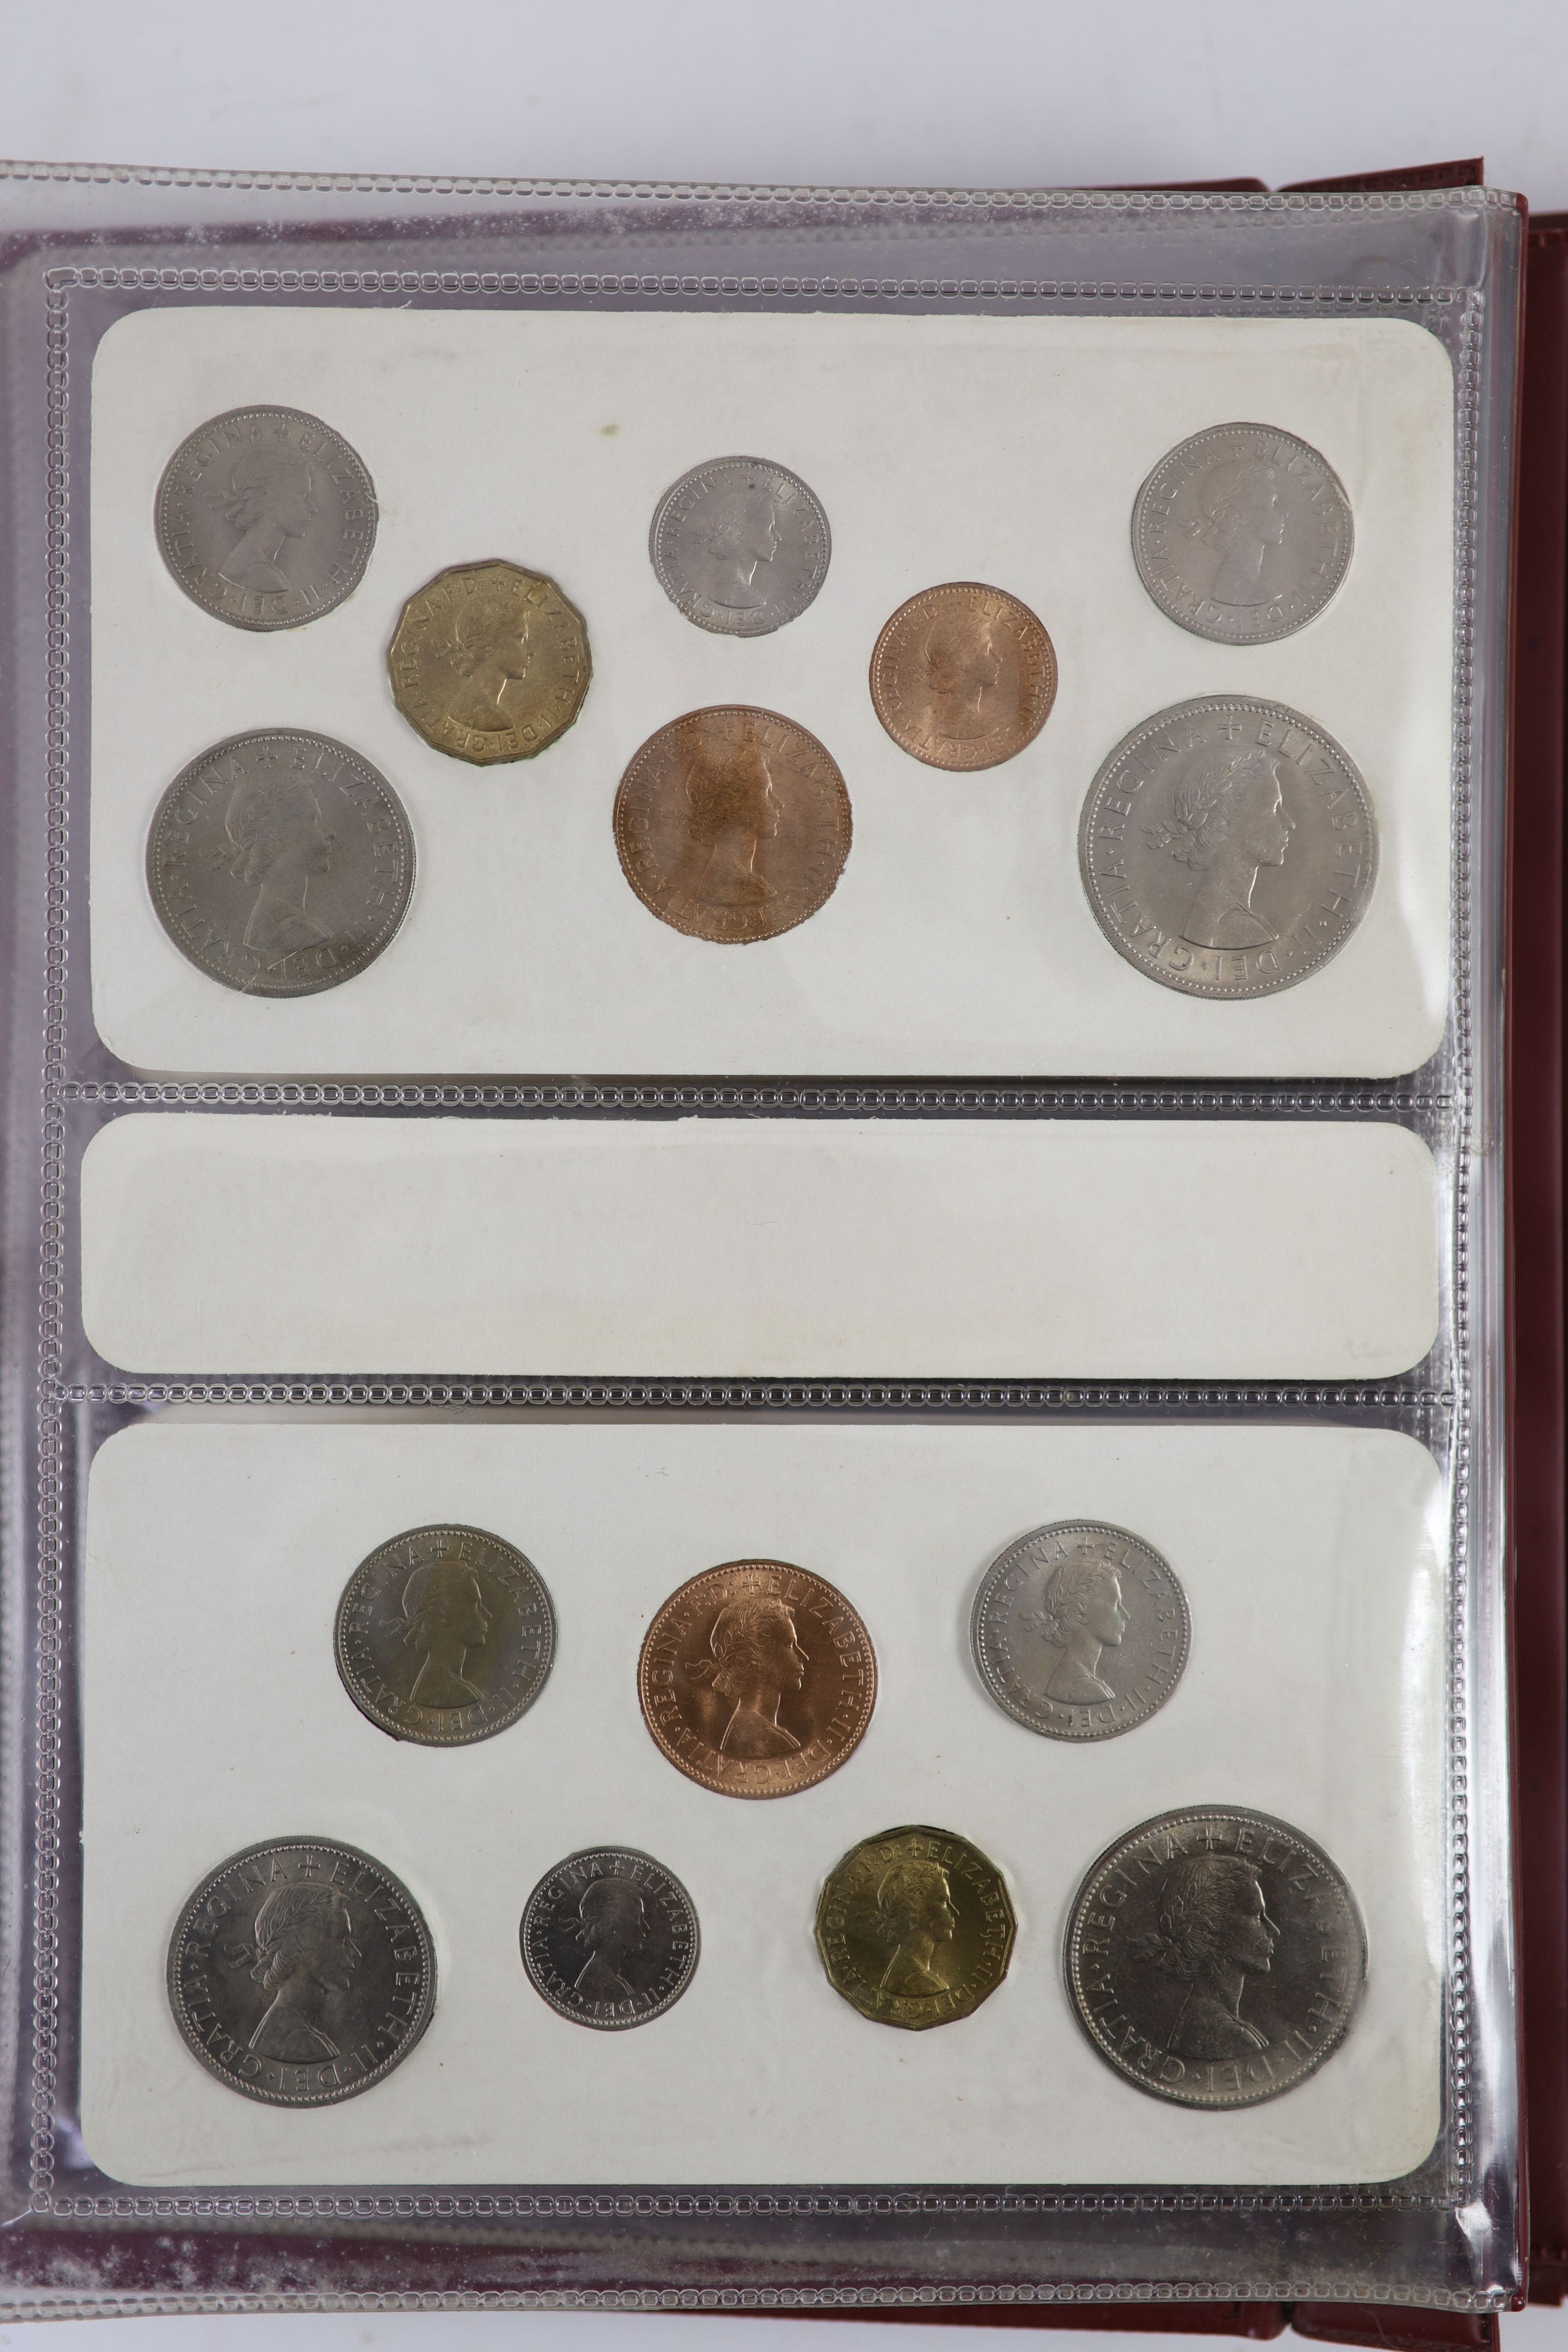 Queen Elizabeth II pre-decimal specimen coin sets for 1953 - 1967, first and second issues, all EF/ - Image 11 of 34